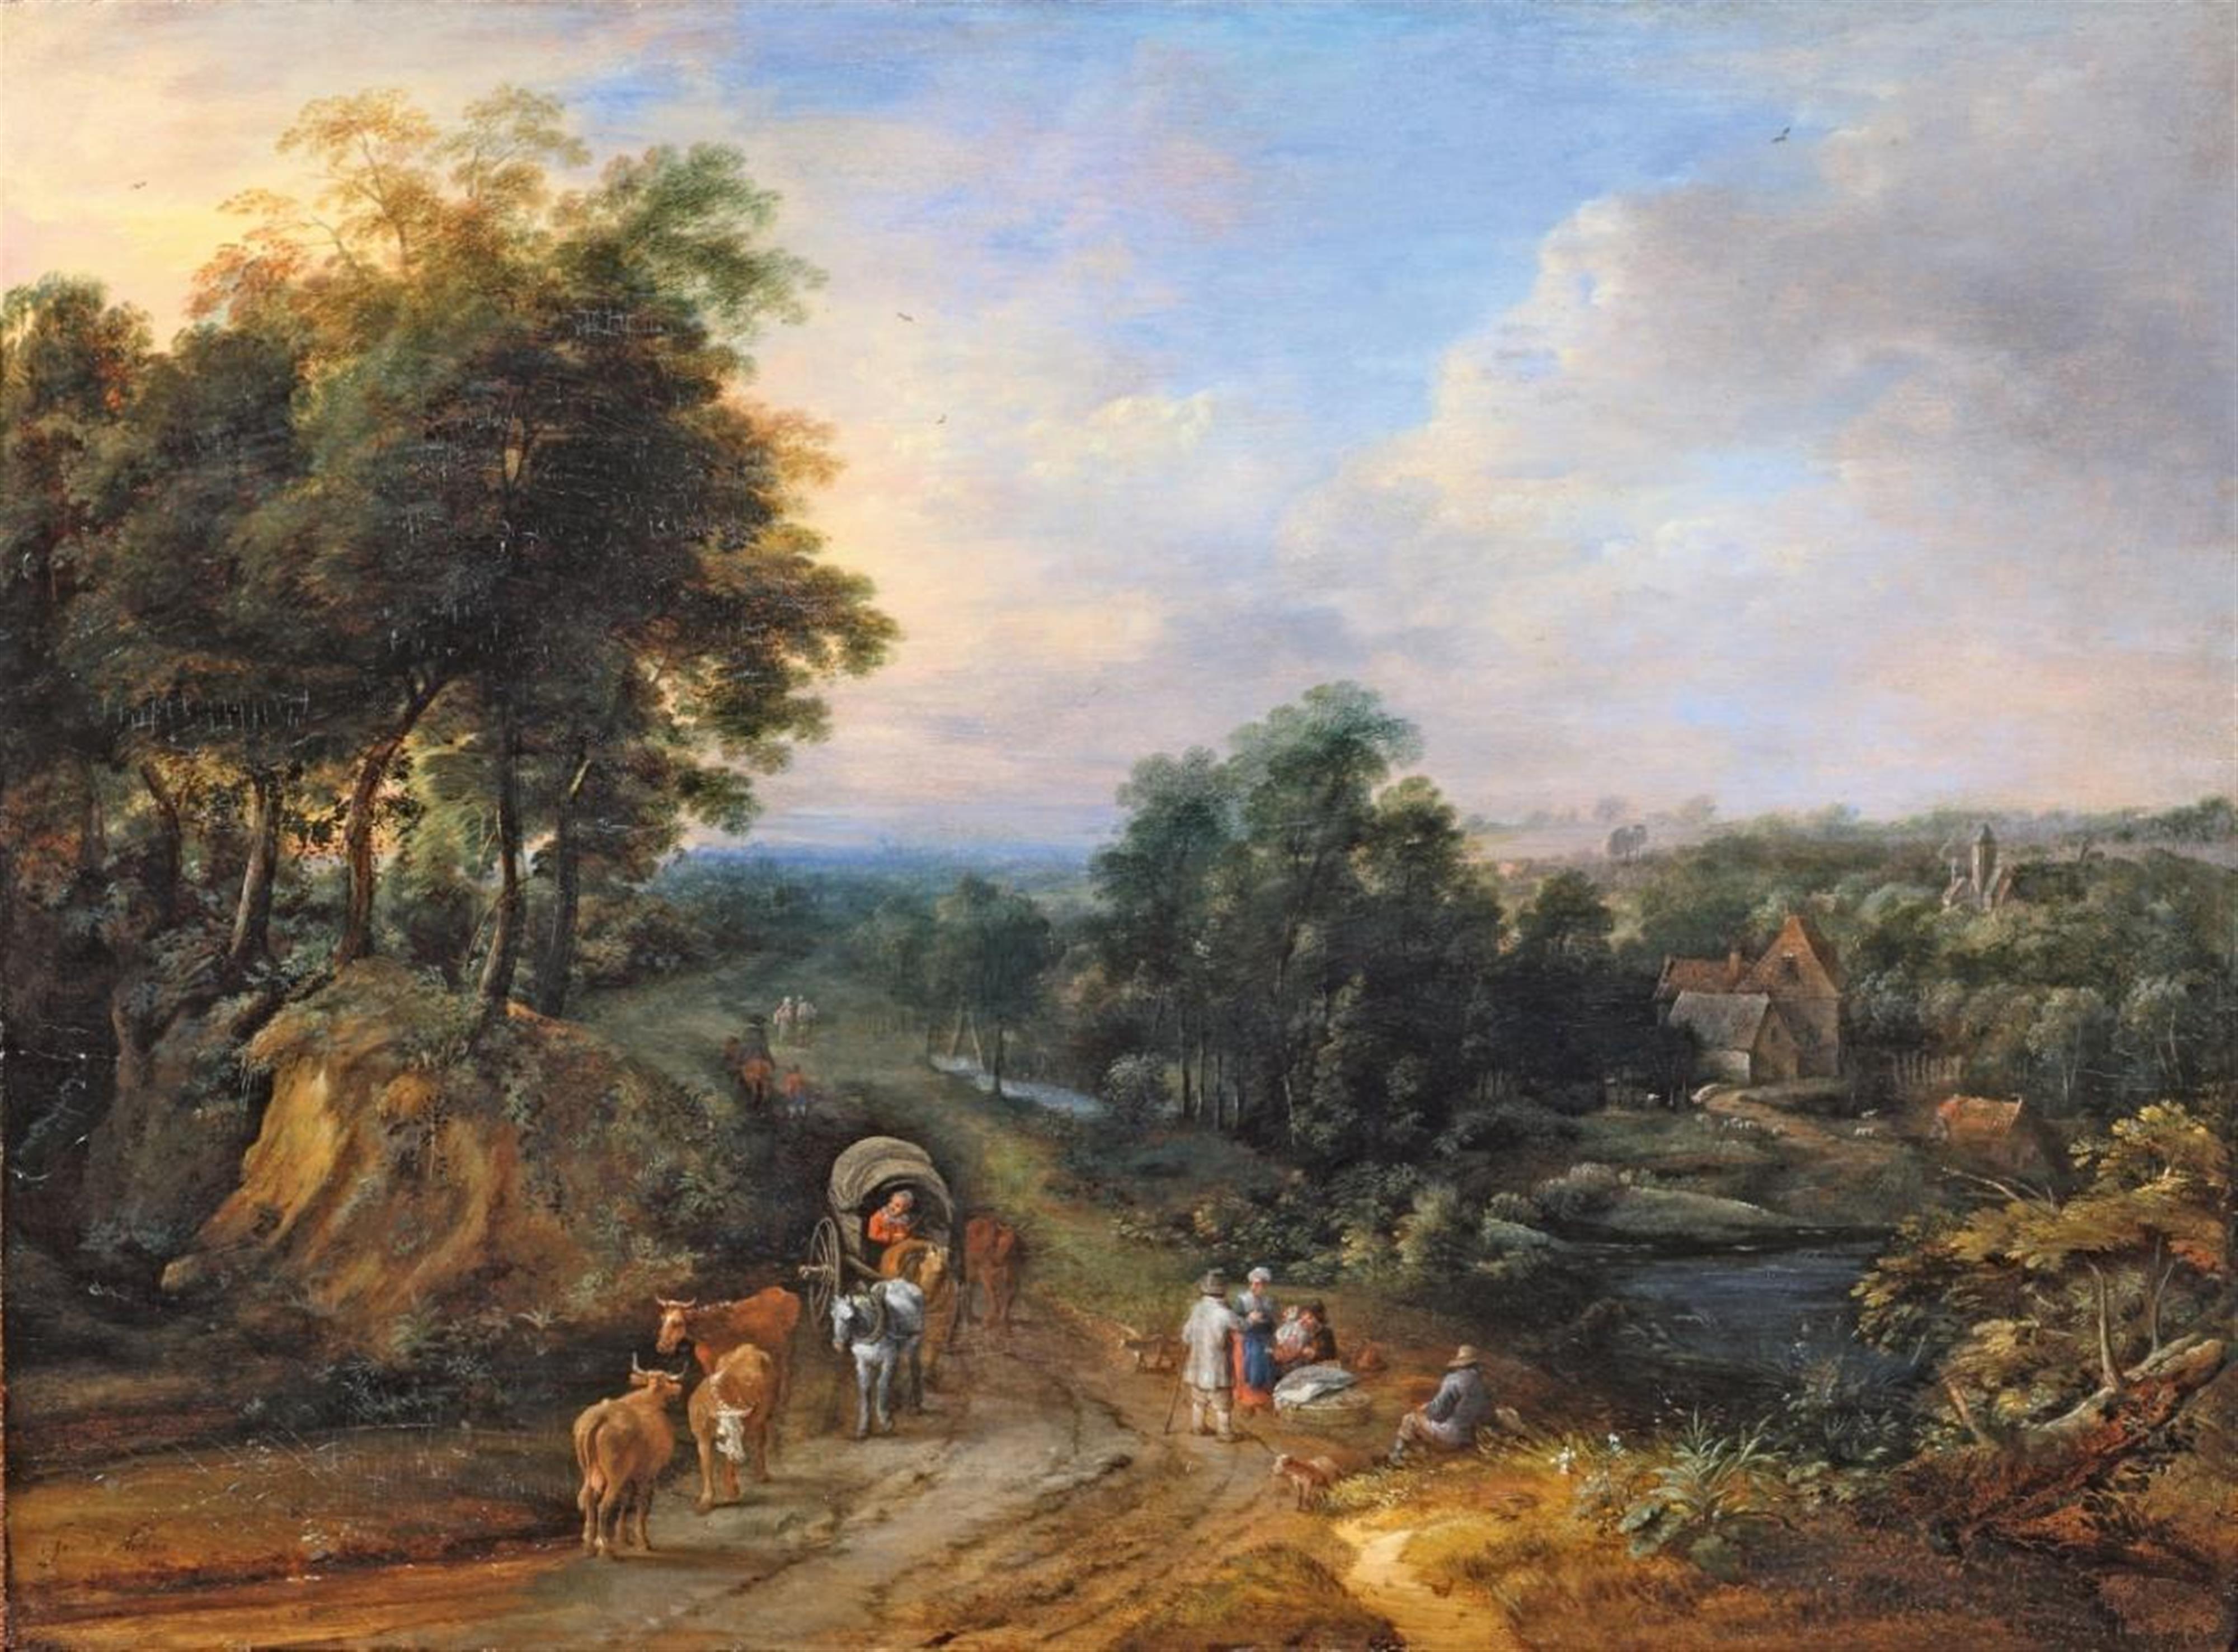 Jacques D' Arthois - WIDE LANDSCAPE WITH CART AND FIGURAL STAFFAGE - image-1